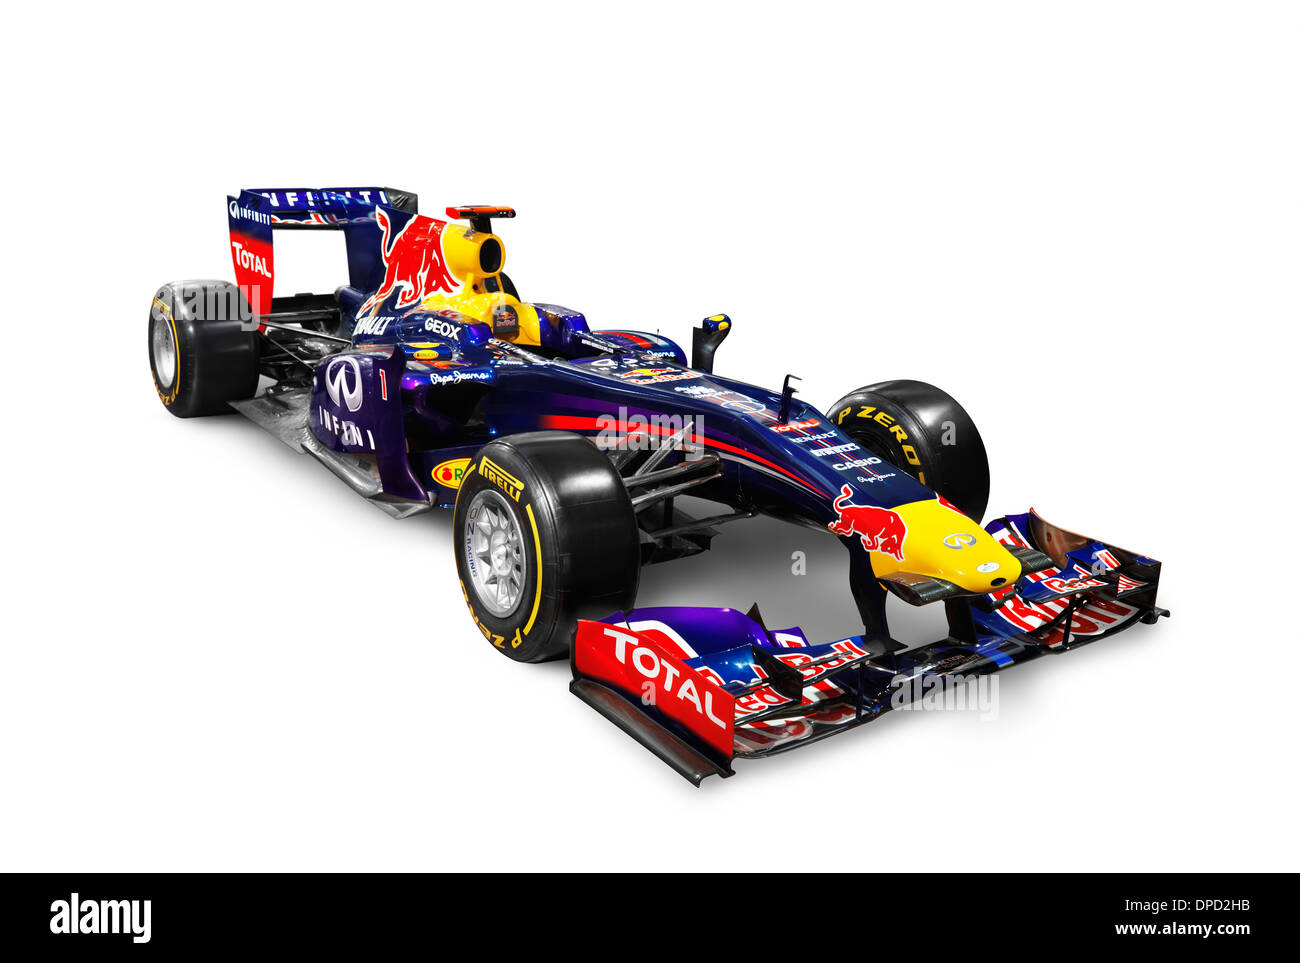 Infinity 2013 Red Bull Formula One race car RB9 isolé sur fond blanc avec clipping path Banque D'Images